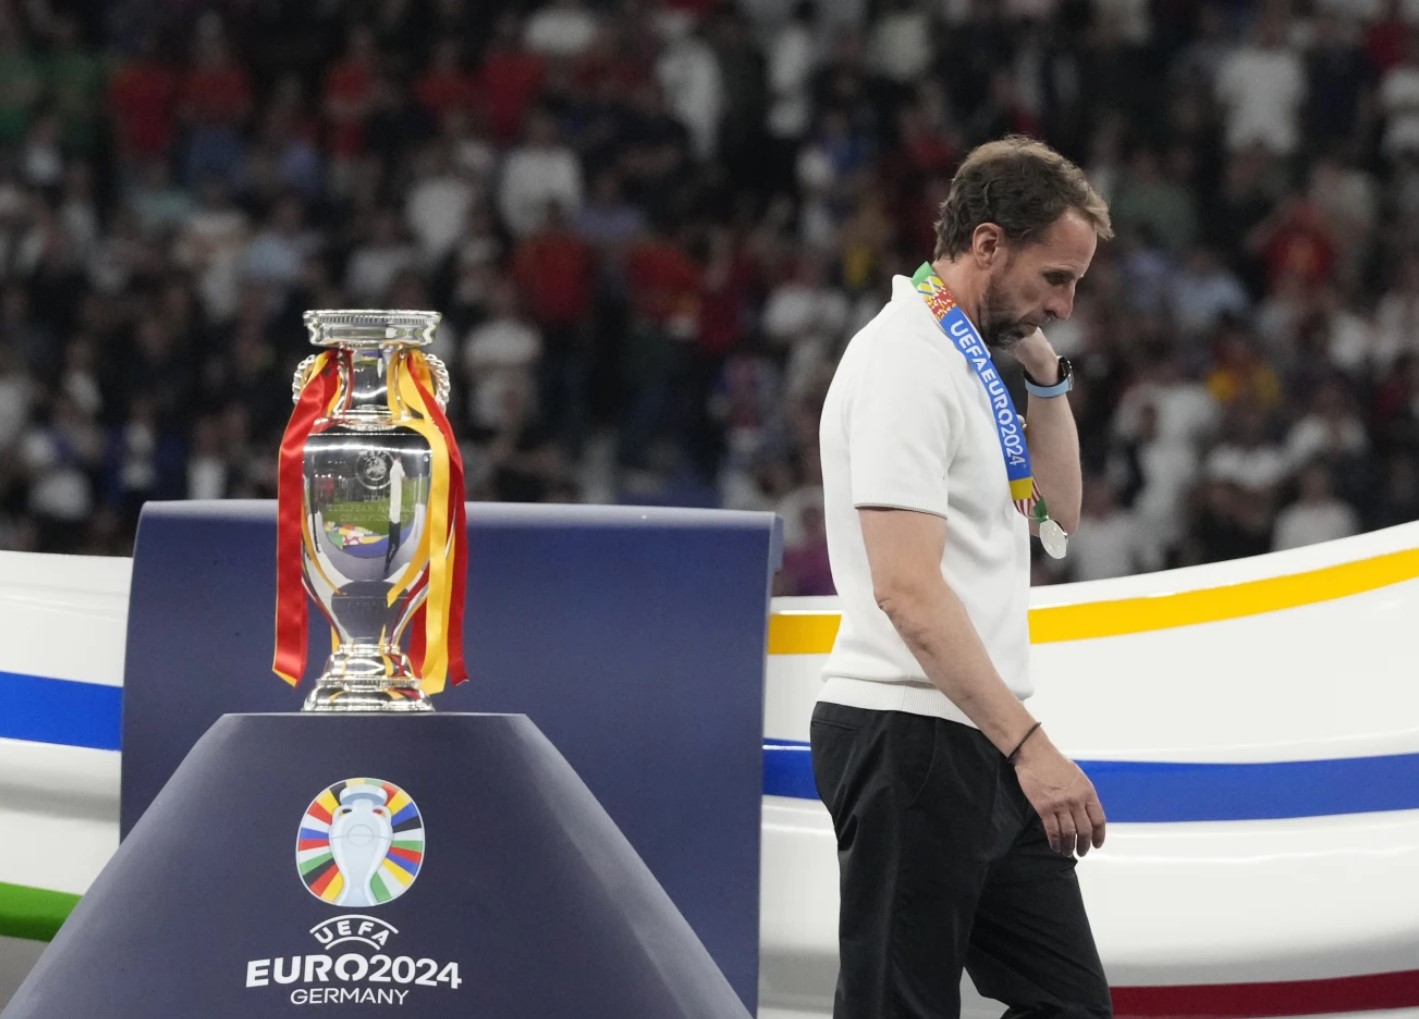 Gareth Southgate, then manager of England men's team, walks past the trophy at the end of the UEFA Euro final between Spain and England, in Berlin, Germany, July 14, 2024. /CFP